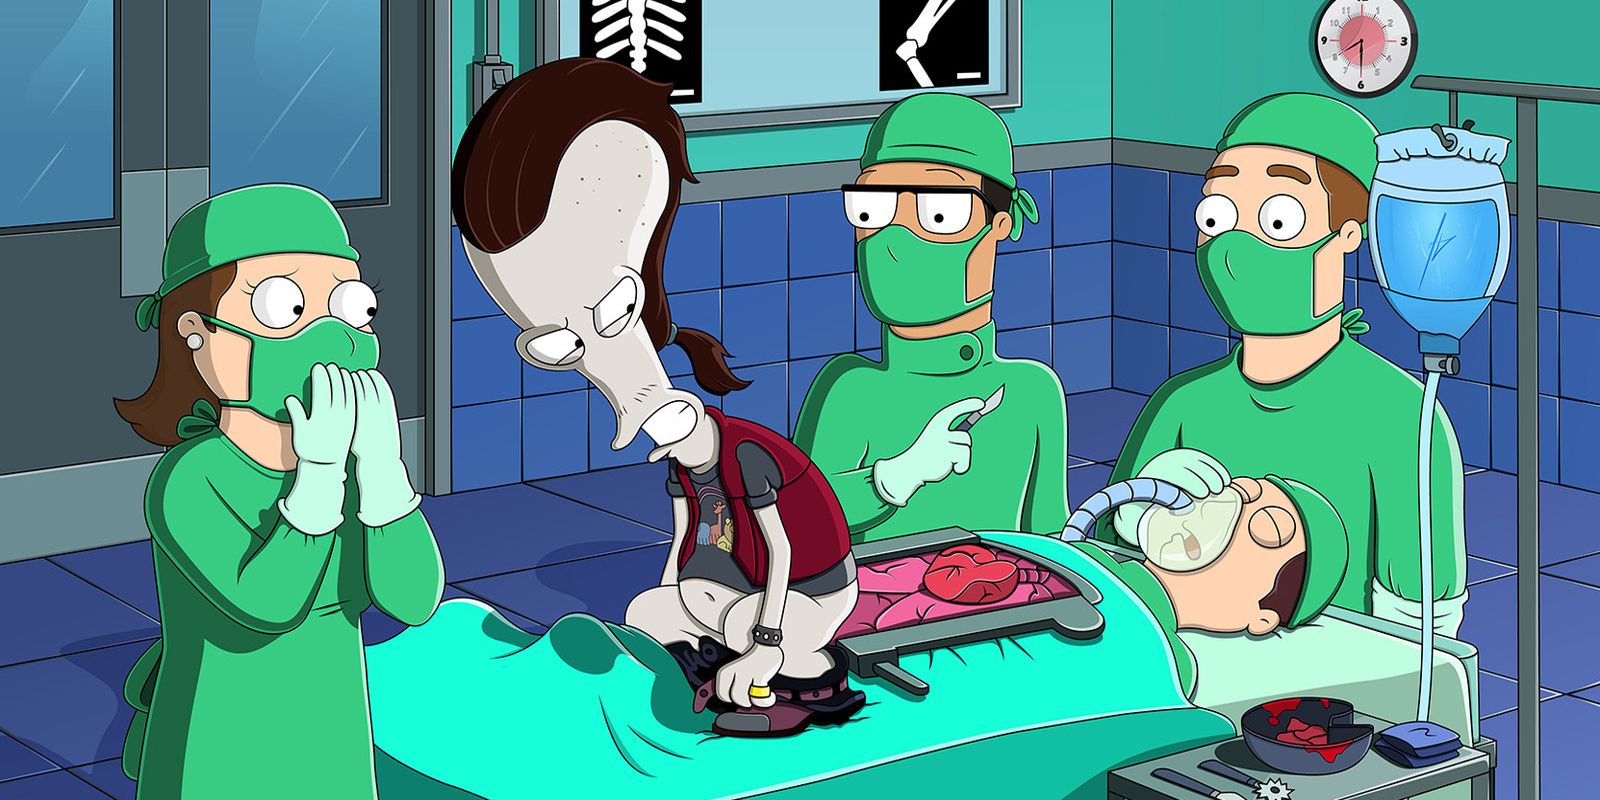 Roger being a jerk in the ER from American Dad